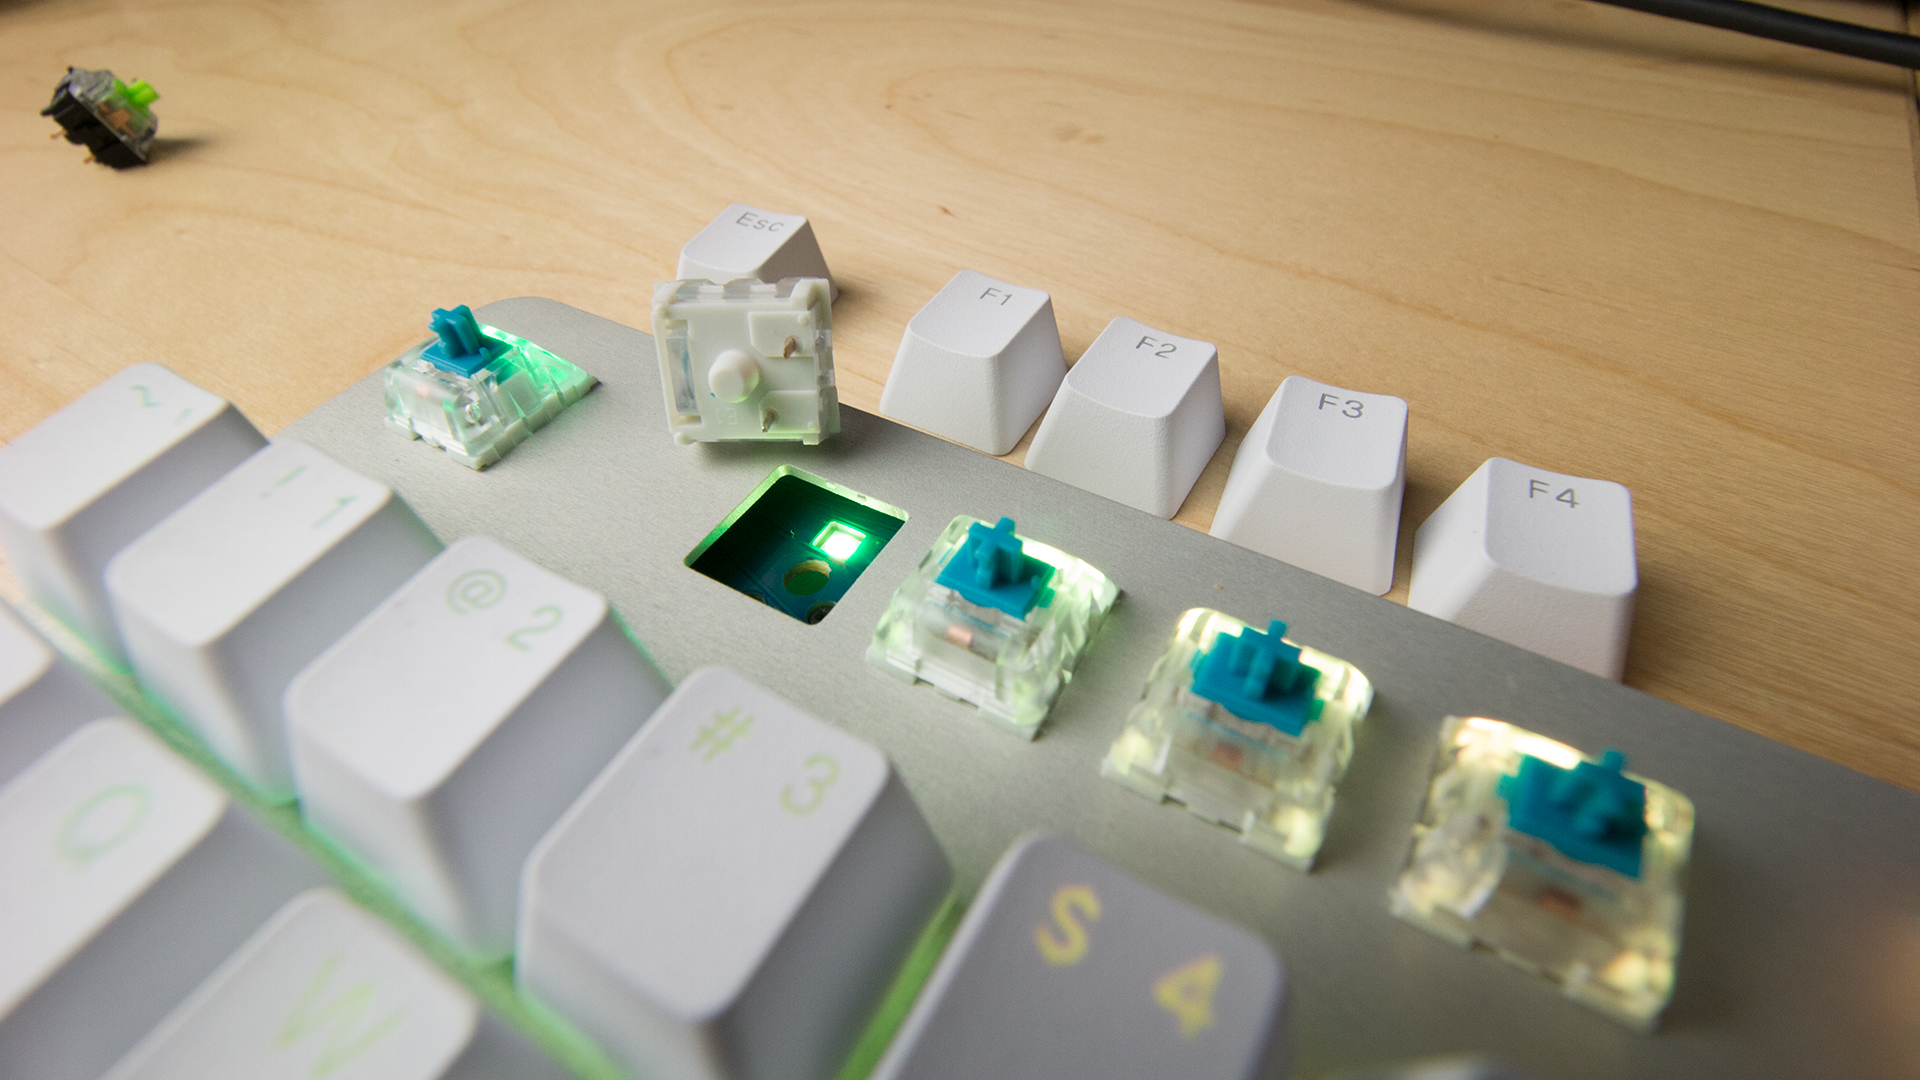 The Open Source K-Type Keyboard Makes A Fantastic First Impression